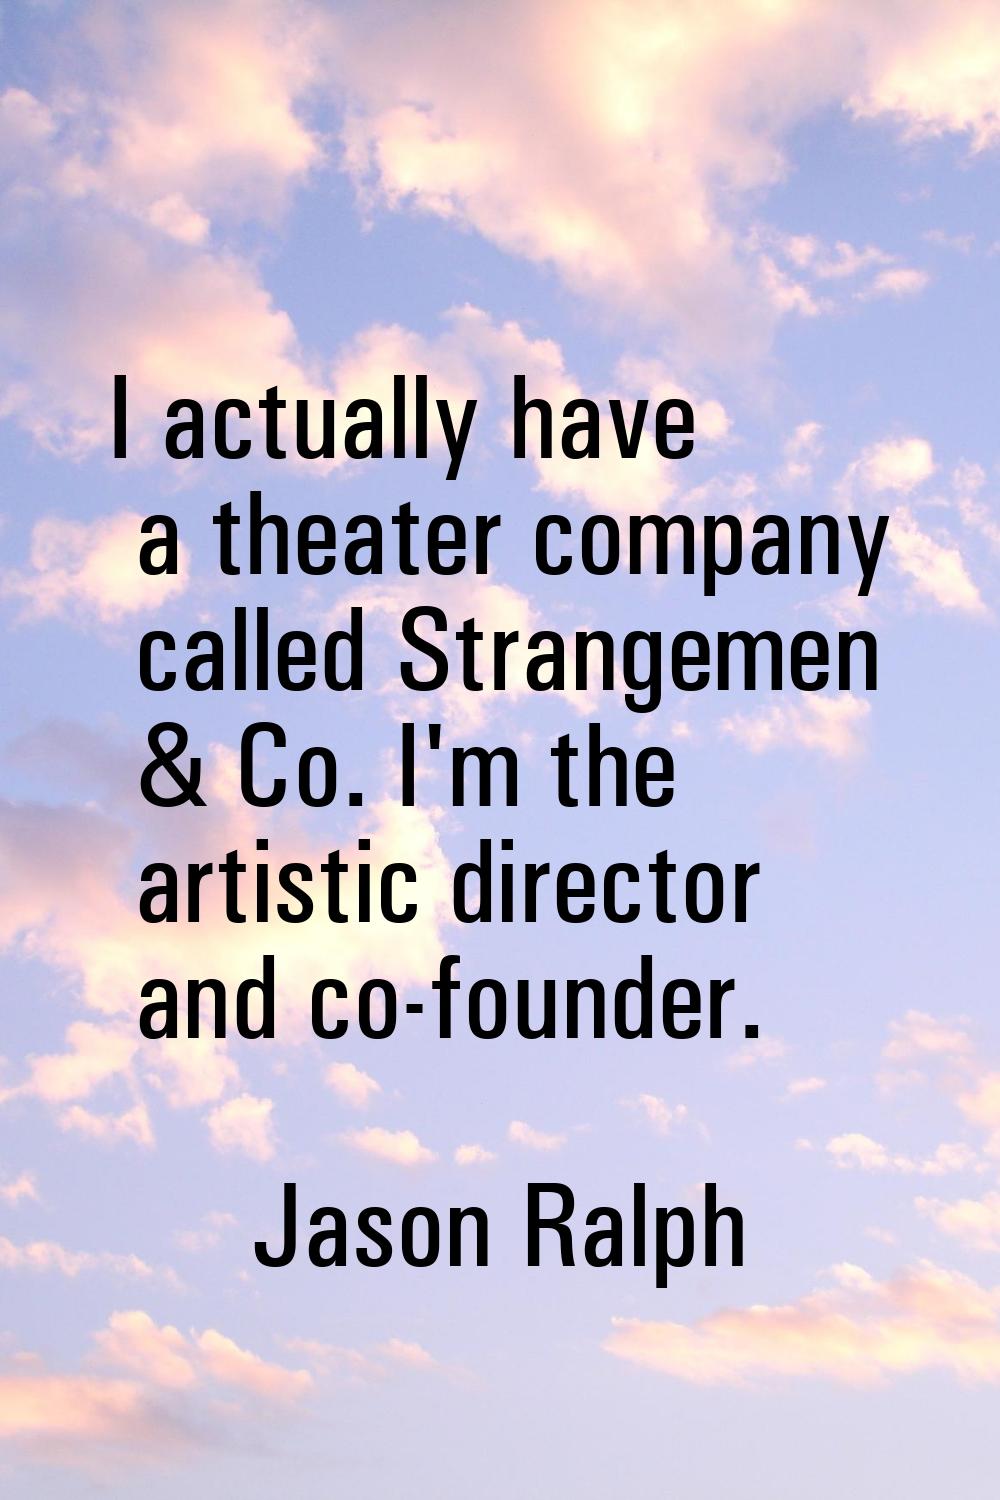 I actually have a theater company called Strangemen & Co. I'm the artistic director and co-founder.